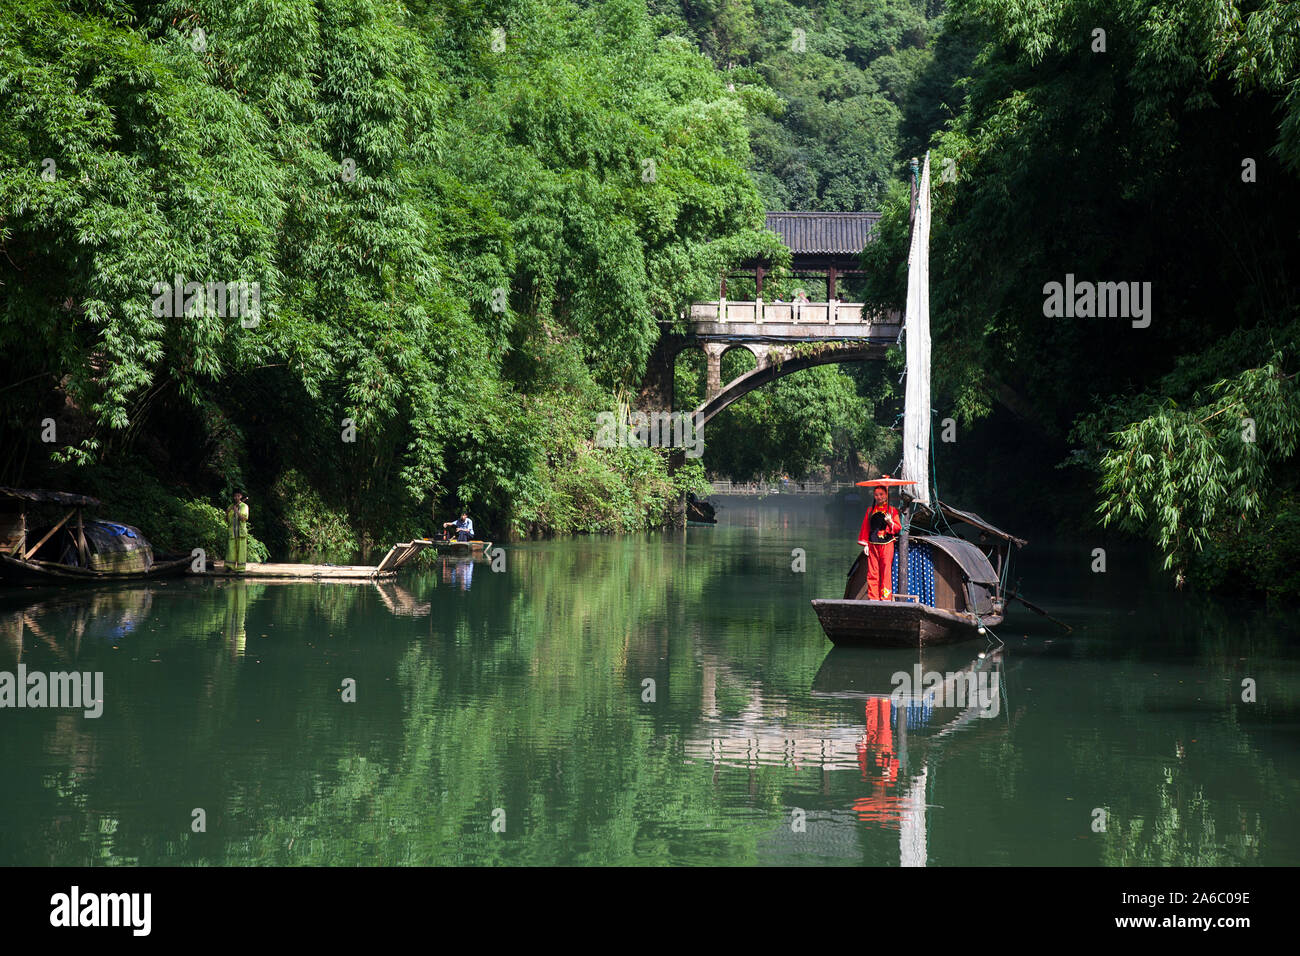 Chinese woman in traditional dress on boat at Tribe of The Three Gorges on Yangtze River China Stock Photo